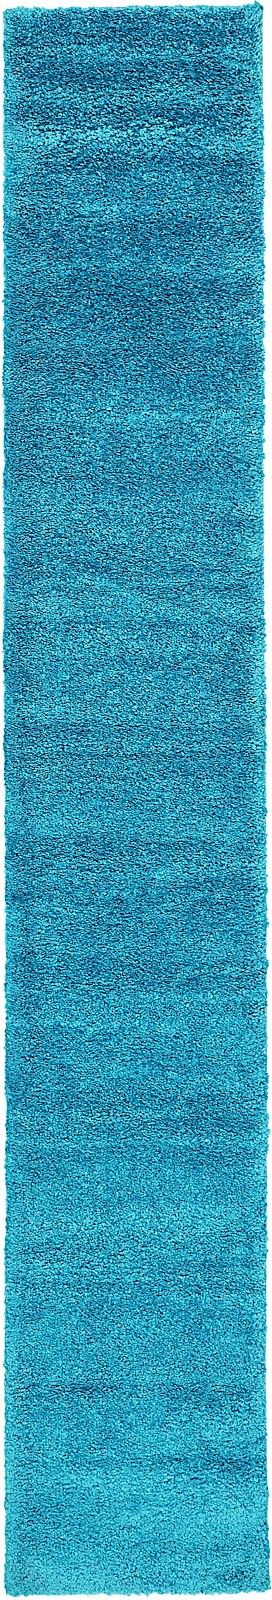 rugpal carrie solid/striped area rug collection